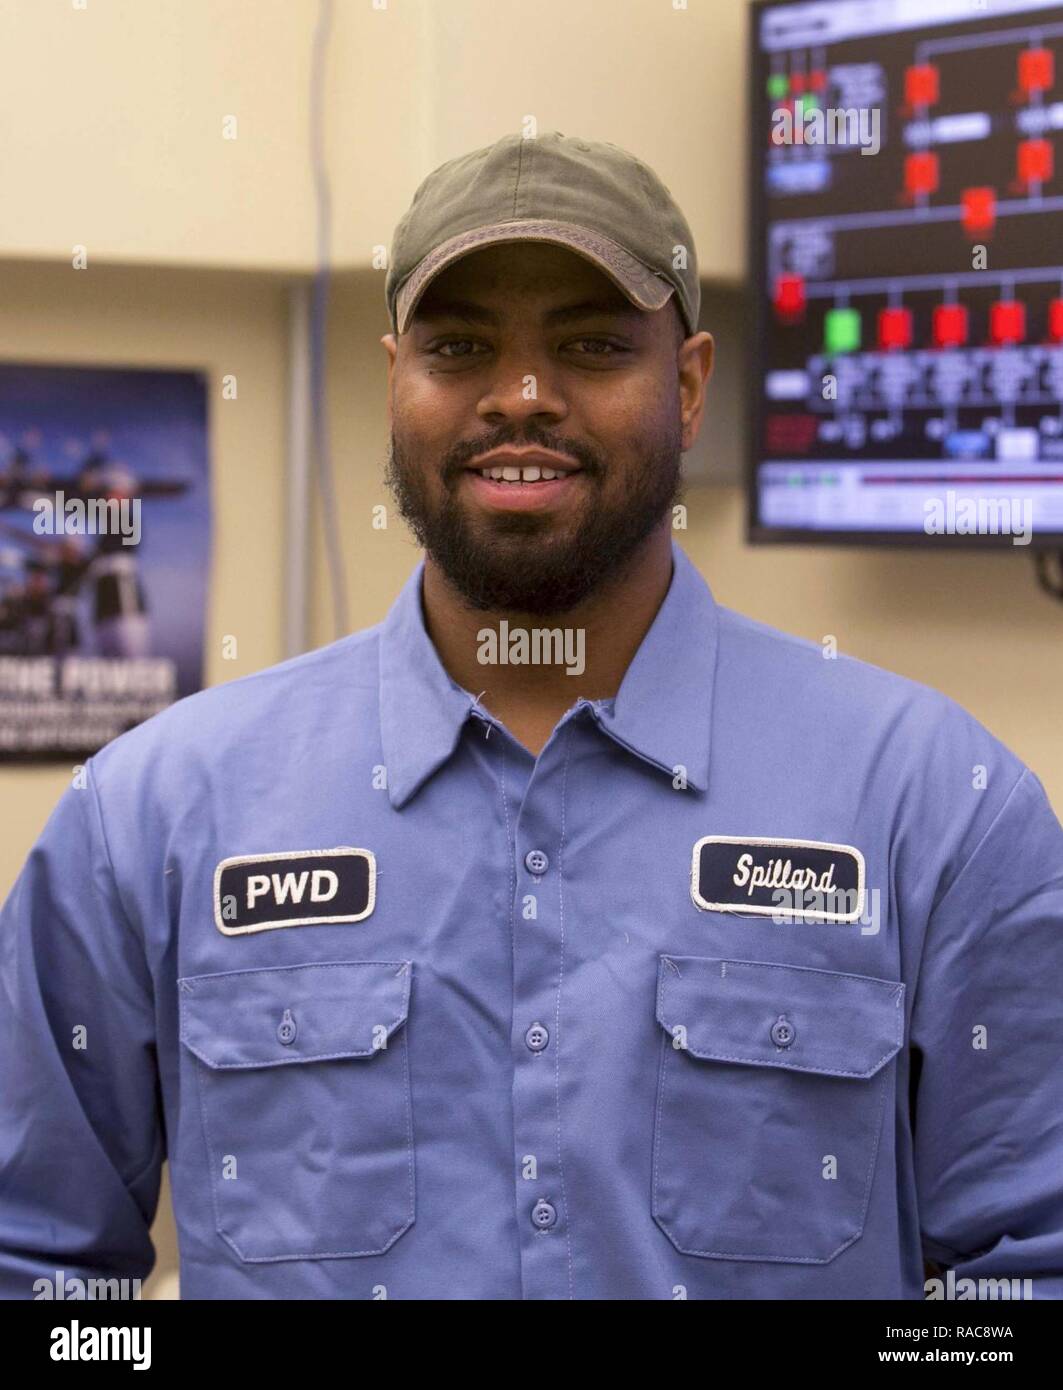 Mike Spillard, boiler plant operator, Public Works Division, enjoys  building and assembling components and has plans to study engineering in  Japan. Spillard, a former Marine intelligence specialist, is learning  Japanese while he